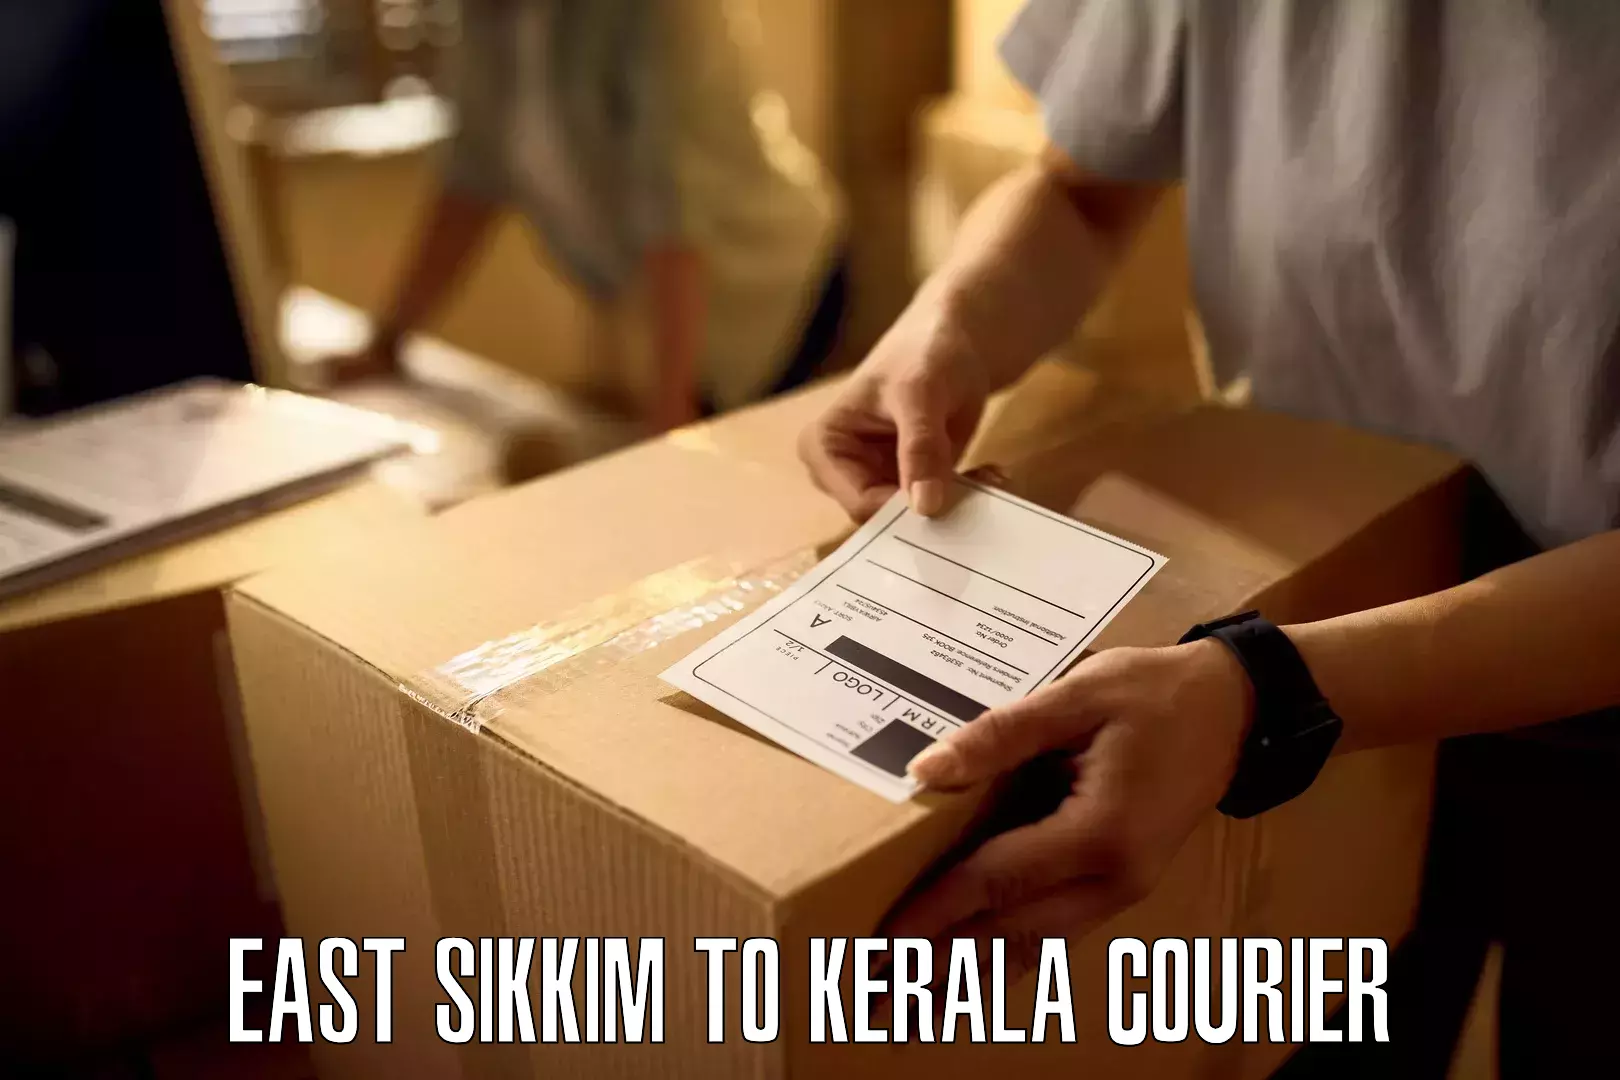 Local delivery service East Sikkim to Kerala